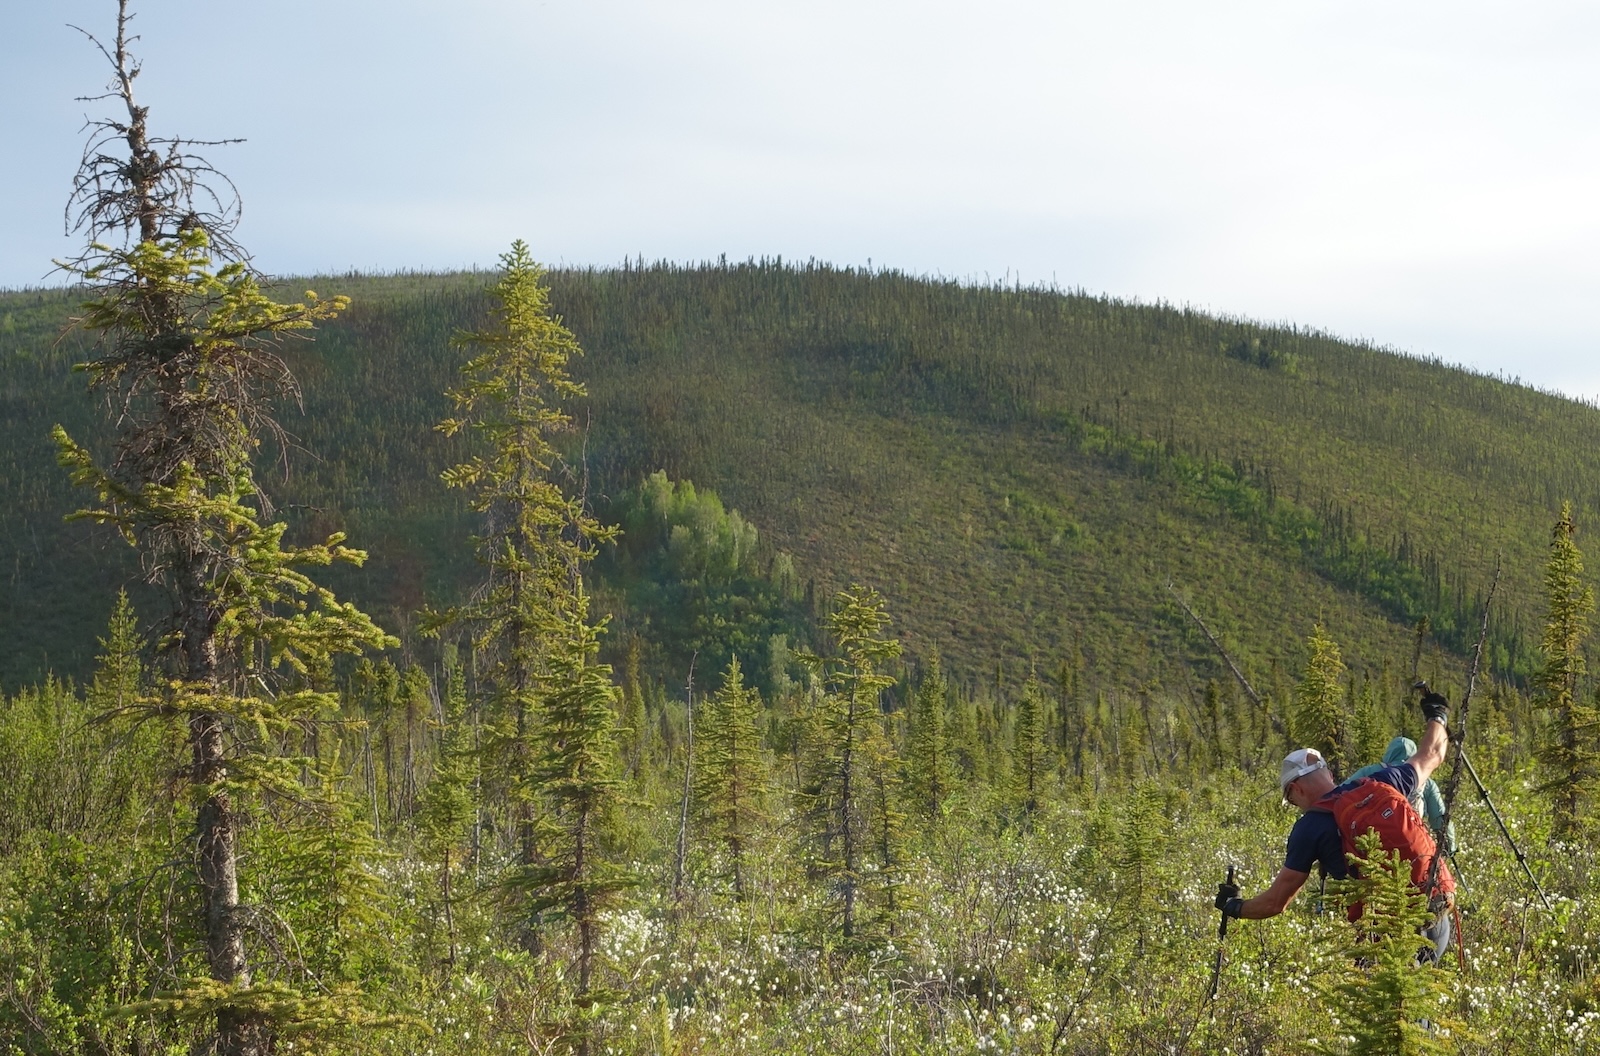 A man throws his right arm up and braces his left on a pole while hiking through a swampy area covered with cottongrass, shrubs and small spruce. Another man in a blue jacket walks ahead of him. A round hill with similar vegetation rises in the distance.